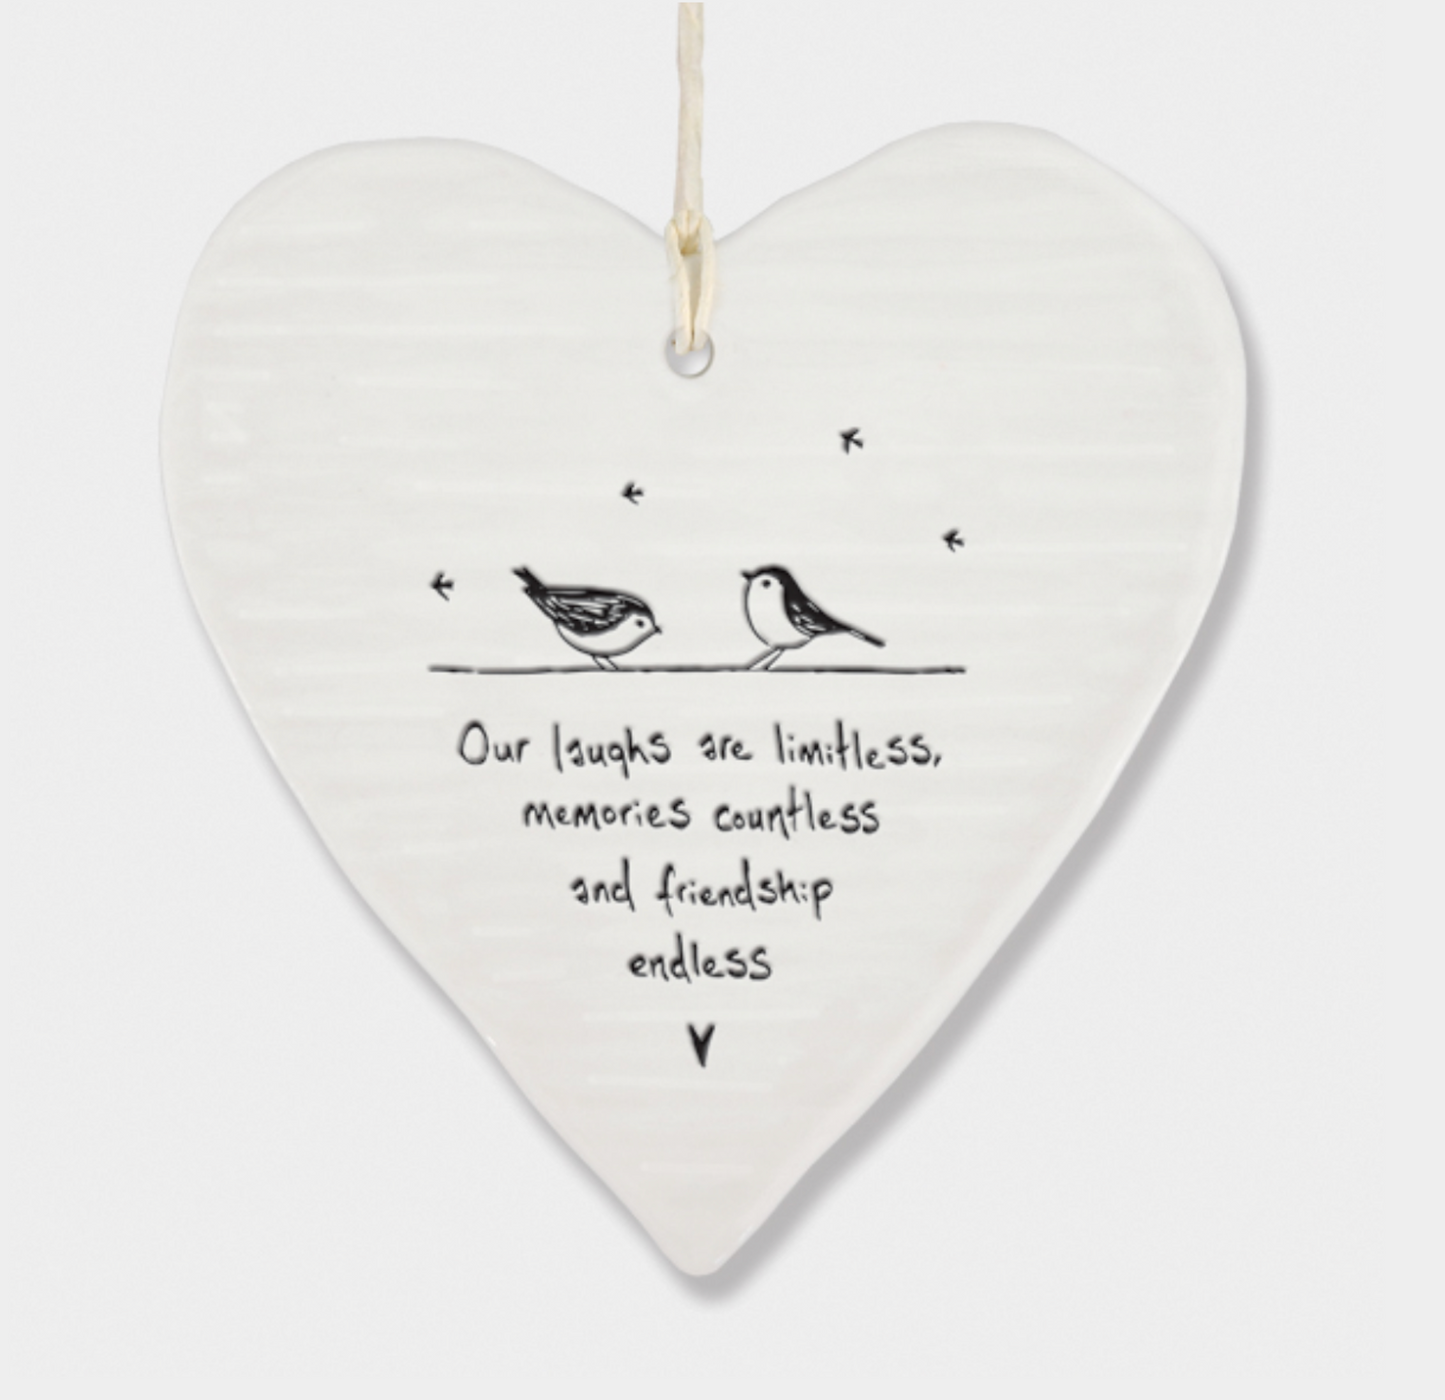 East Of India Porcelain Hanging Heart laughs are limitless Porcelain Gift